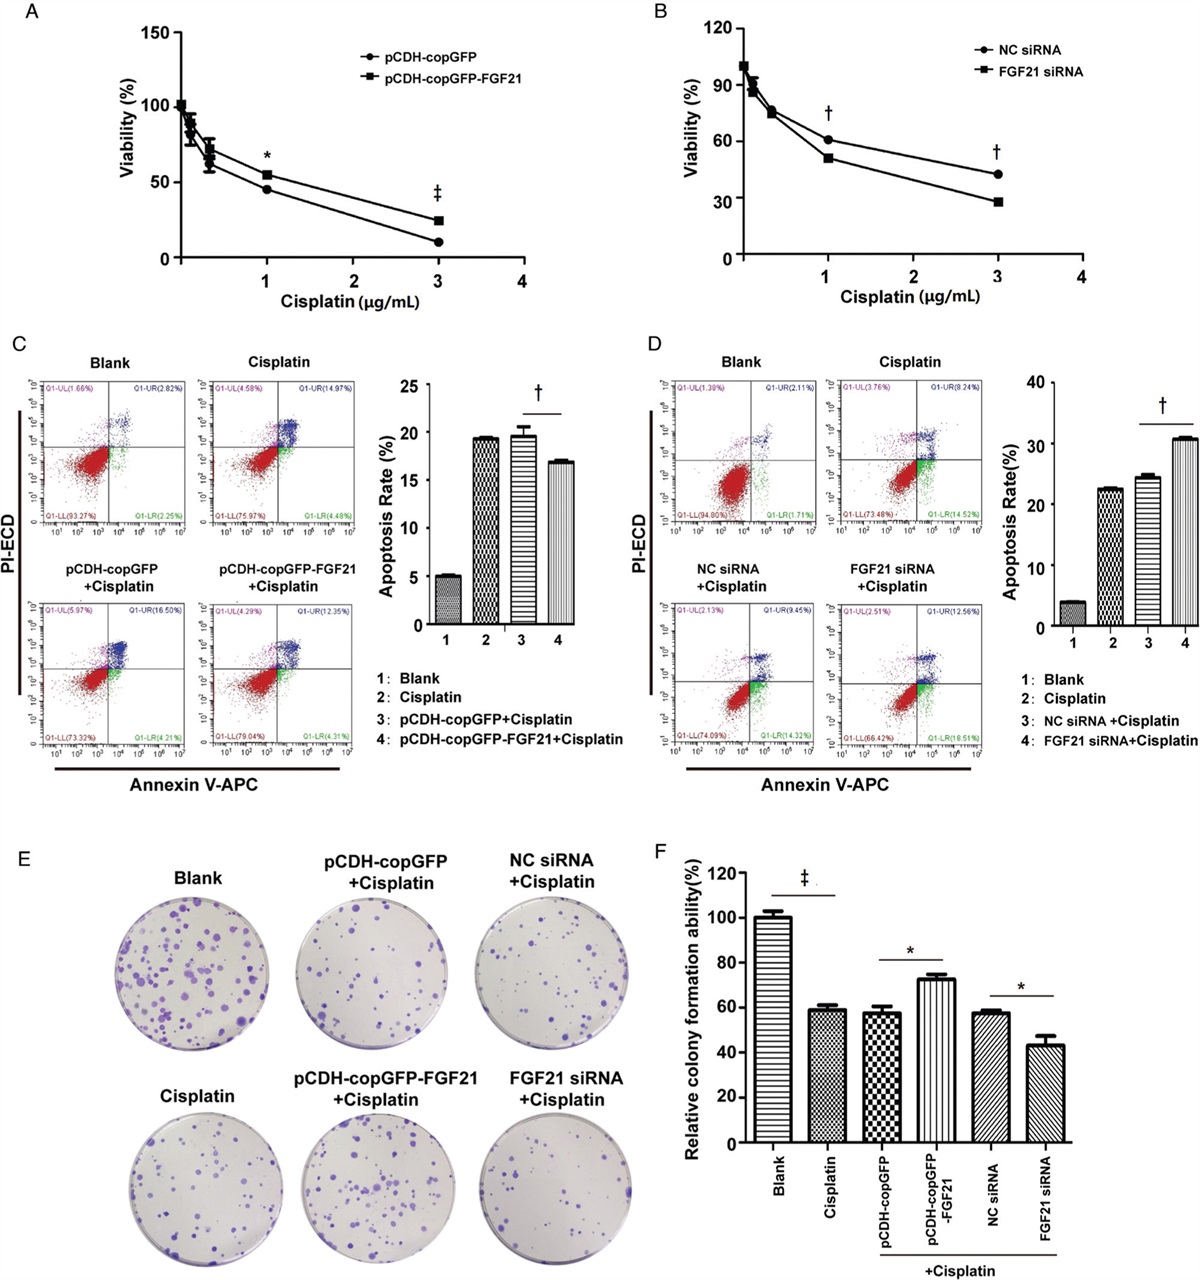 Fibroblast growth factor 21 is related to cisplatin resistance in ovarian cancer